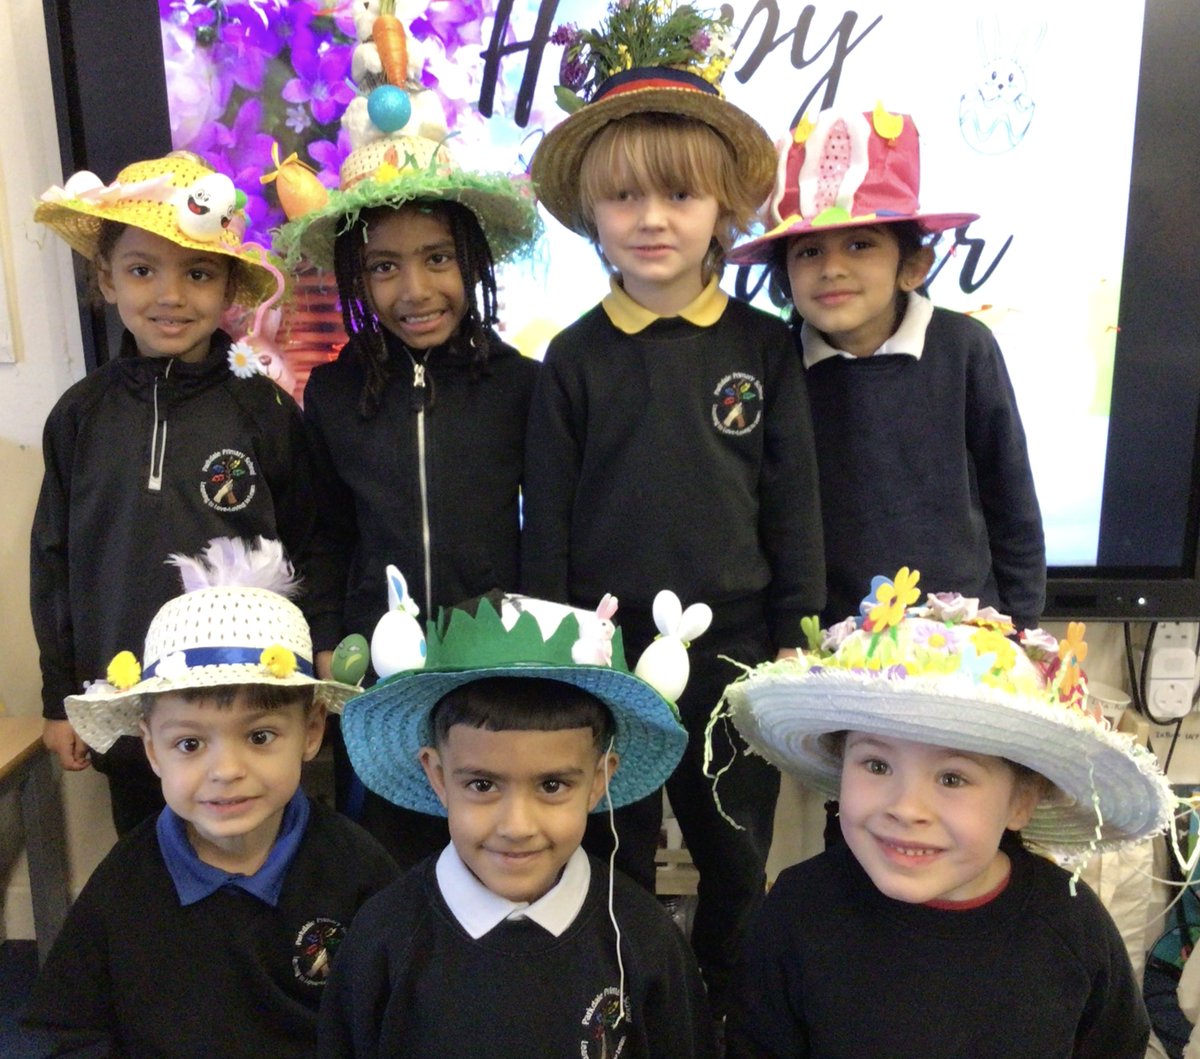 One of the best events of the school year - The Easter Bonnet Parade - and one that families of all backgrounds in our brilliant, diverse community join in with and support in the name of fun and tradition. Truly joyous! :-)